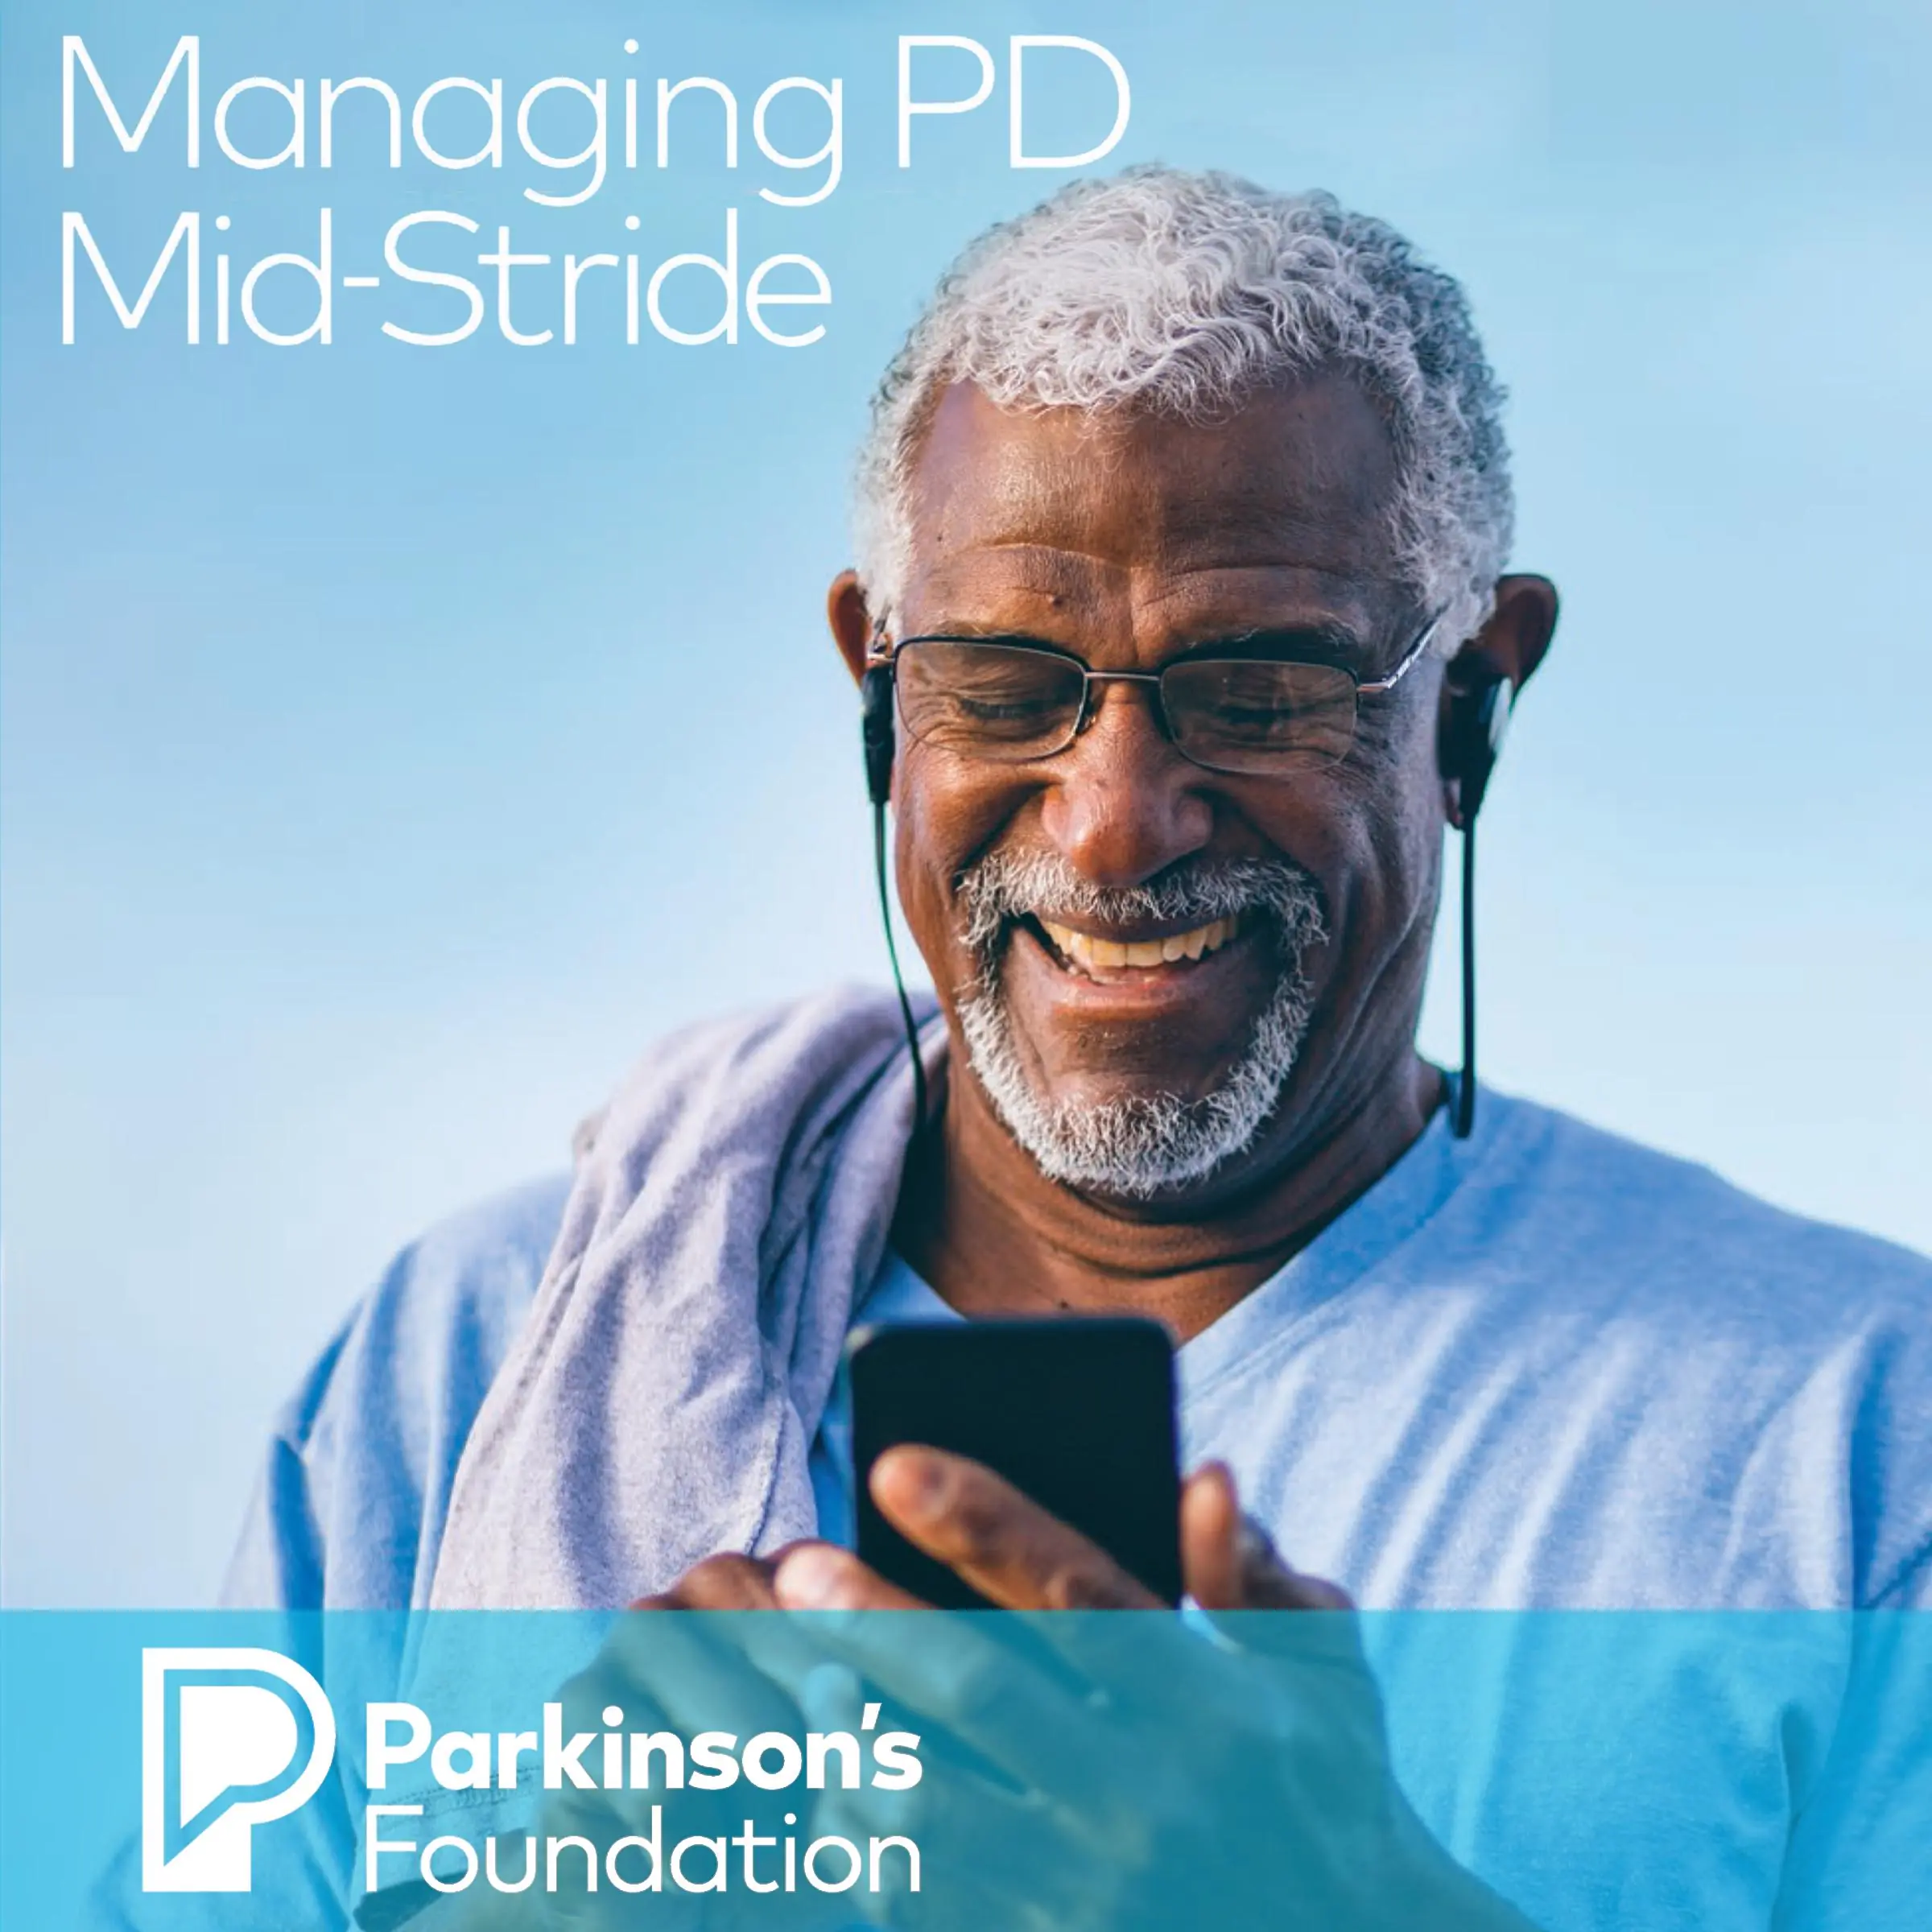 Managing PD Mid-Stride Audiobook by Parkinsons Foundation